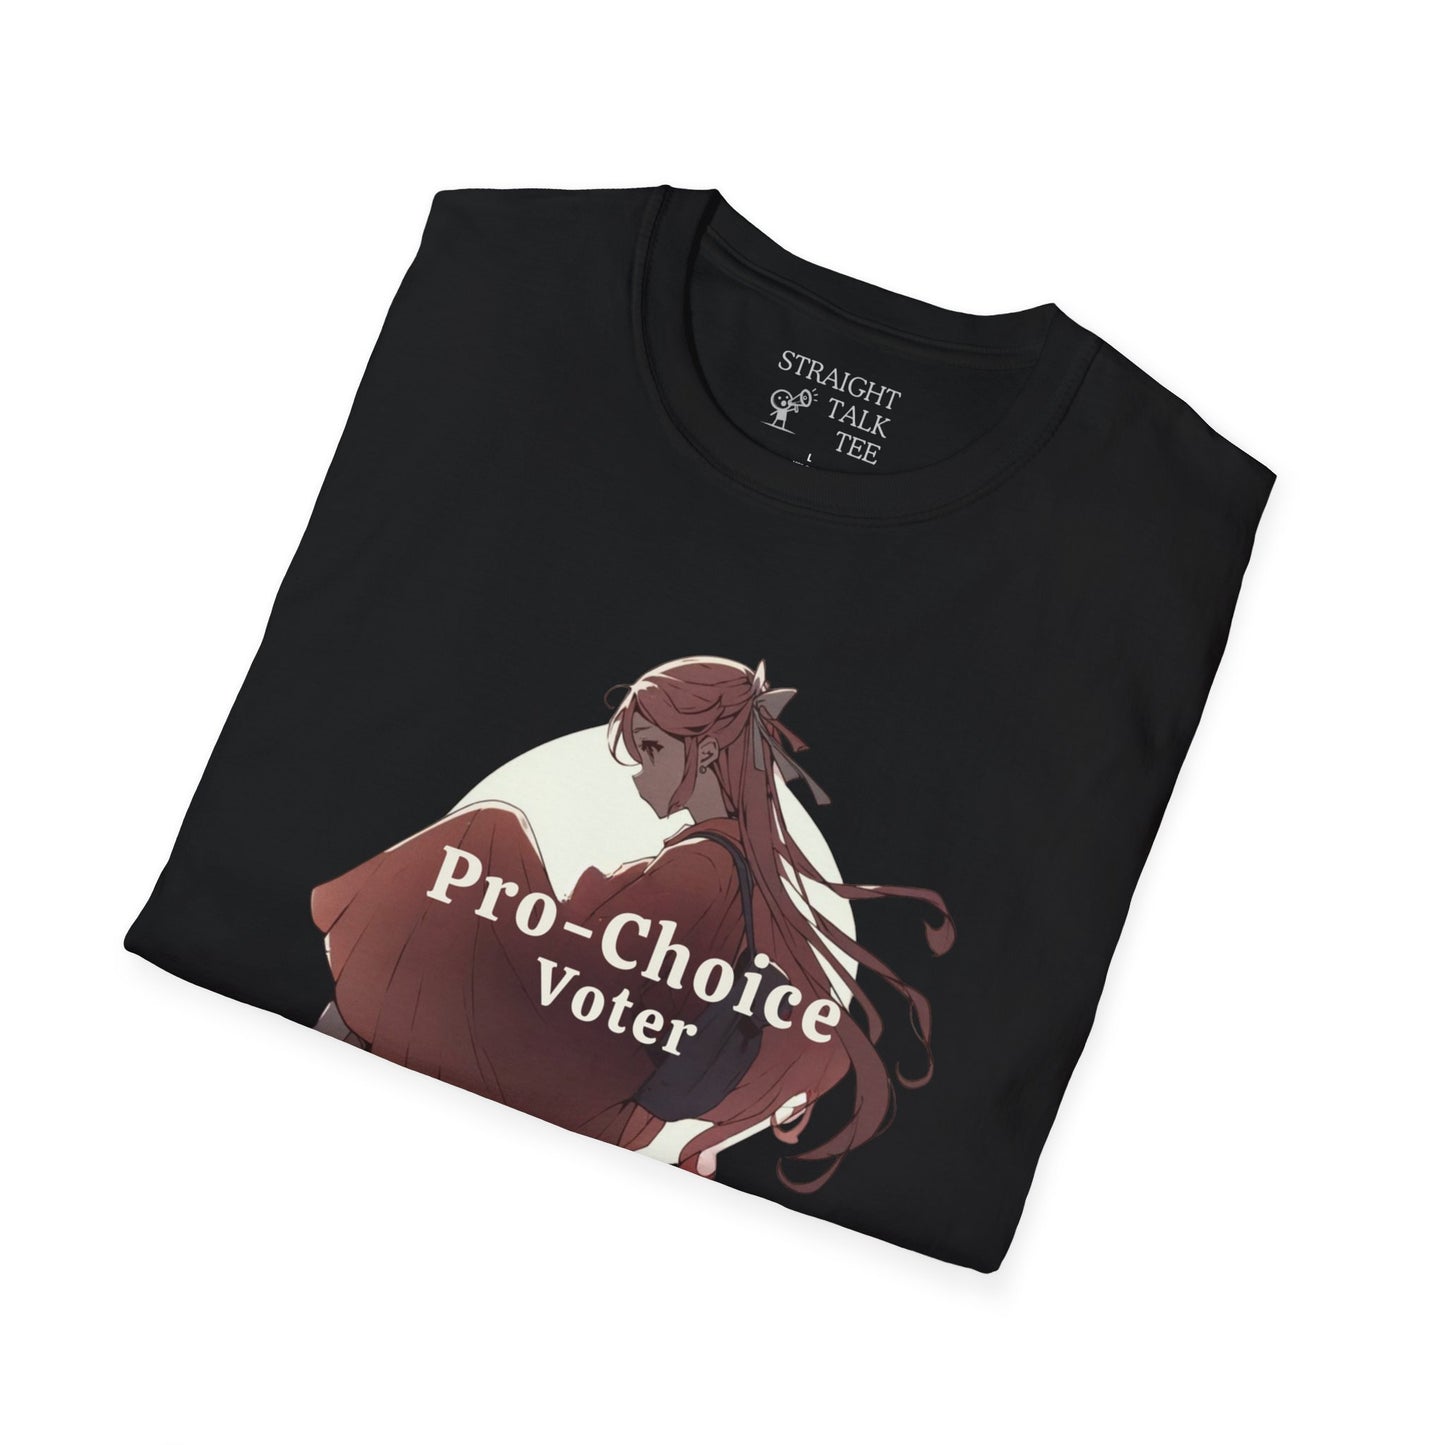 Pro-Choice Voter Anime Soft Style t-shirt |unisex| Political shirt, Inpire, go out and Vote!